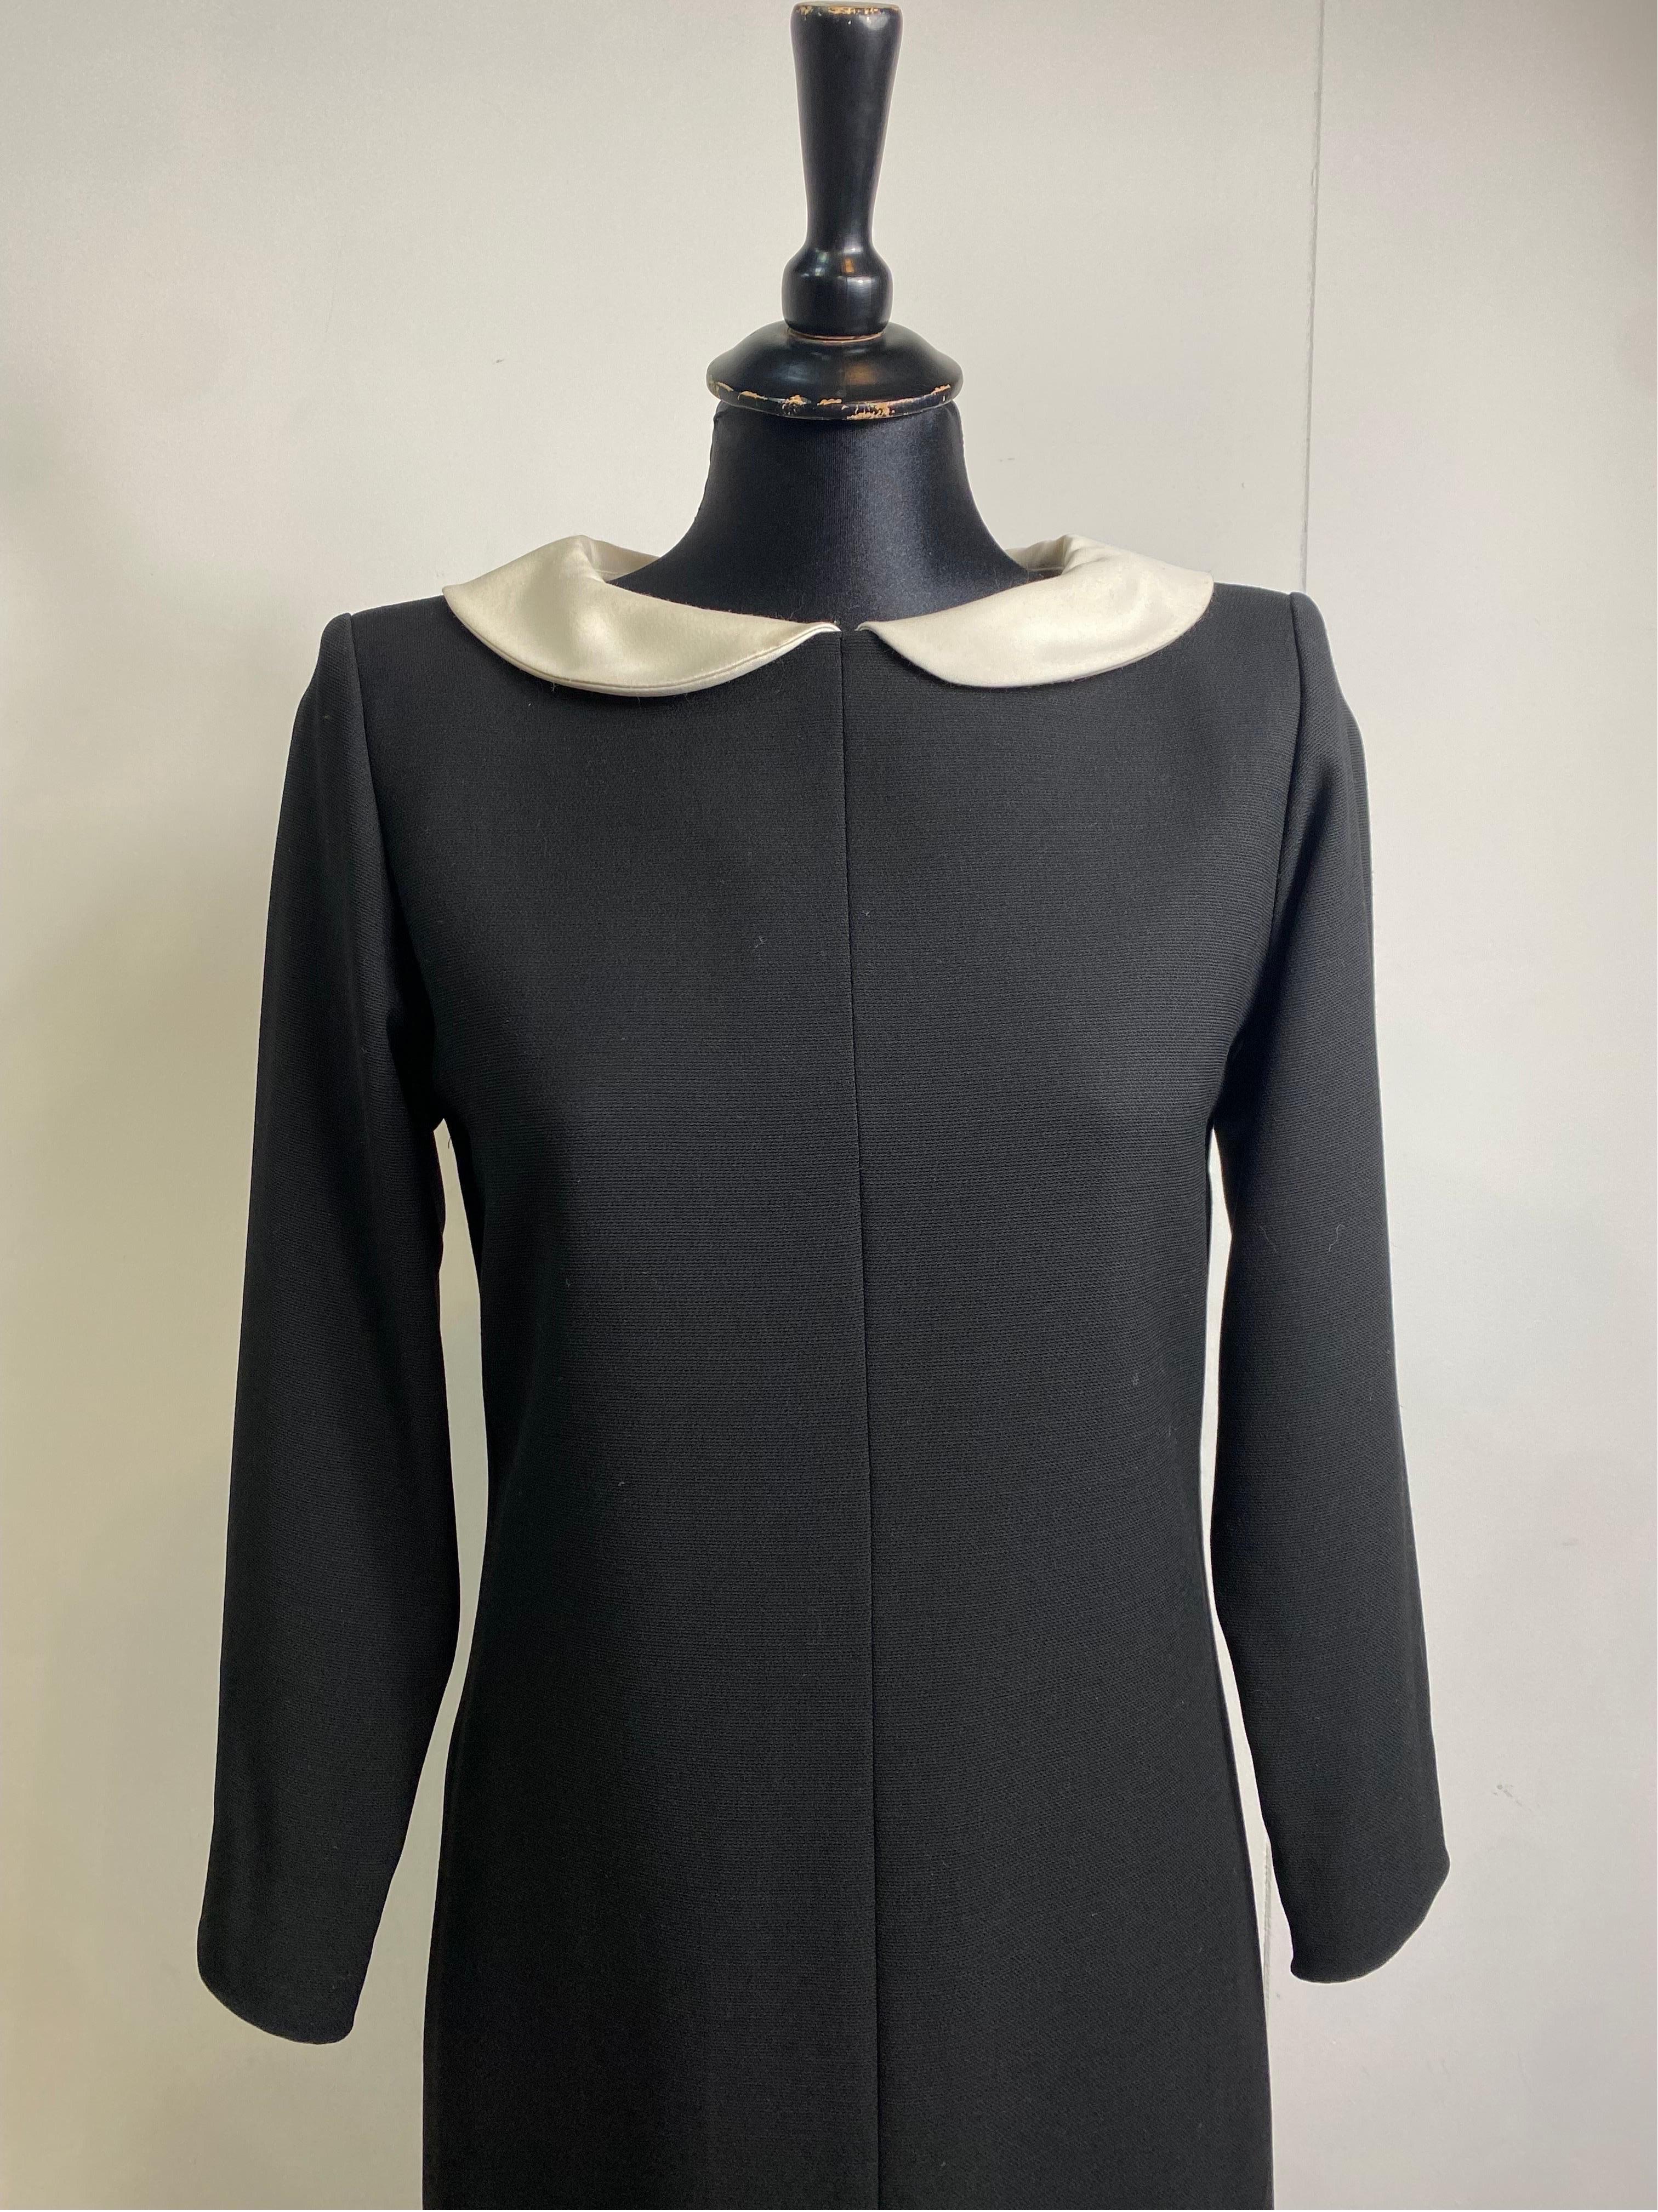 Yves Saint Laurent baby doll Vintage Black Dress In Good Condition For Sale In Carnate, IT